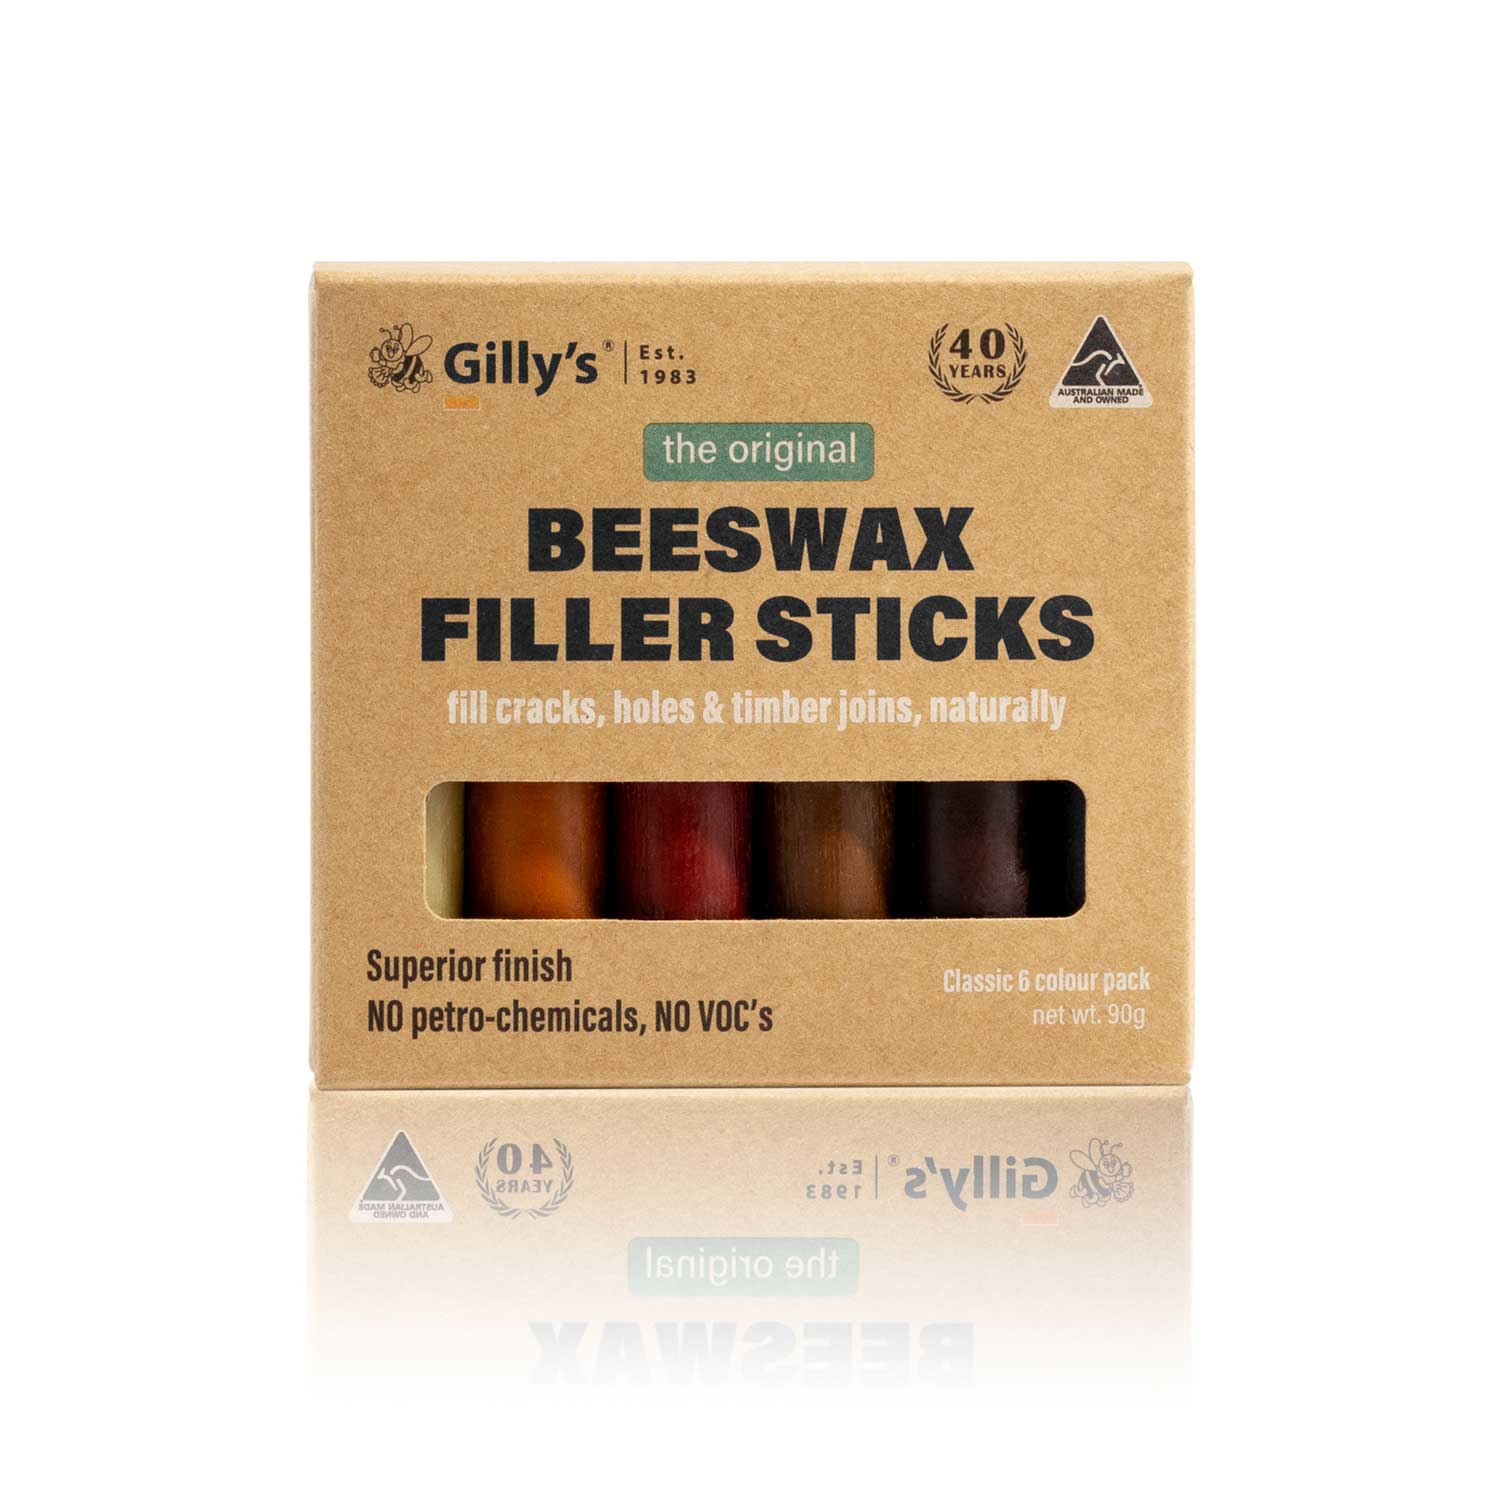 6Pce Beeswax Filler Sticks BFSMIX6 by Gilly's